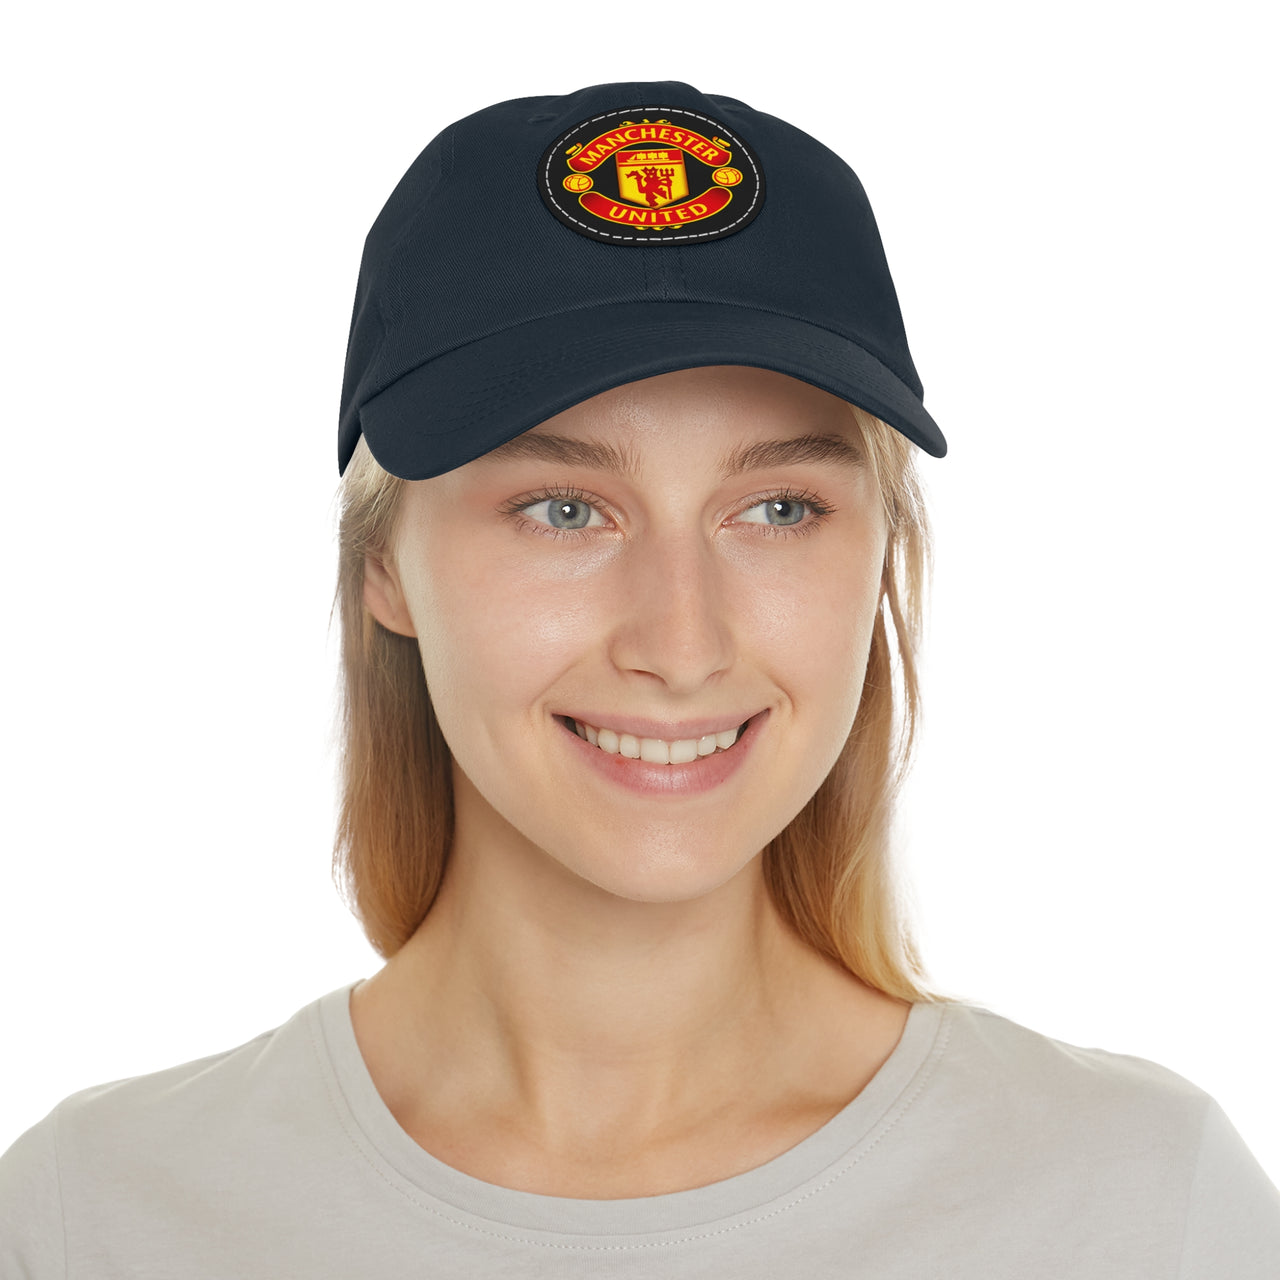 Manchester United Dad Hat with Leather Patch (Round)